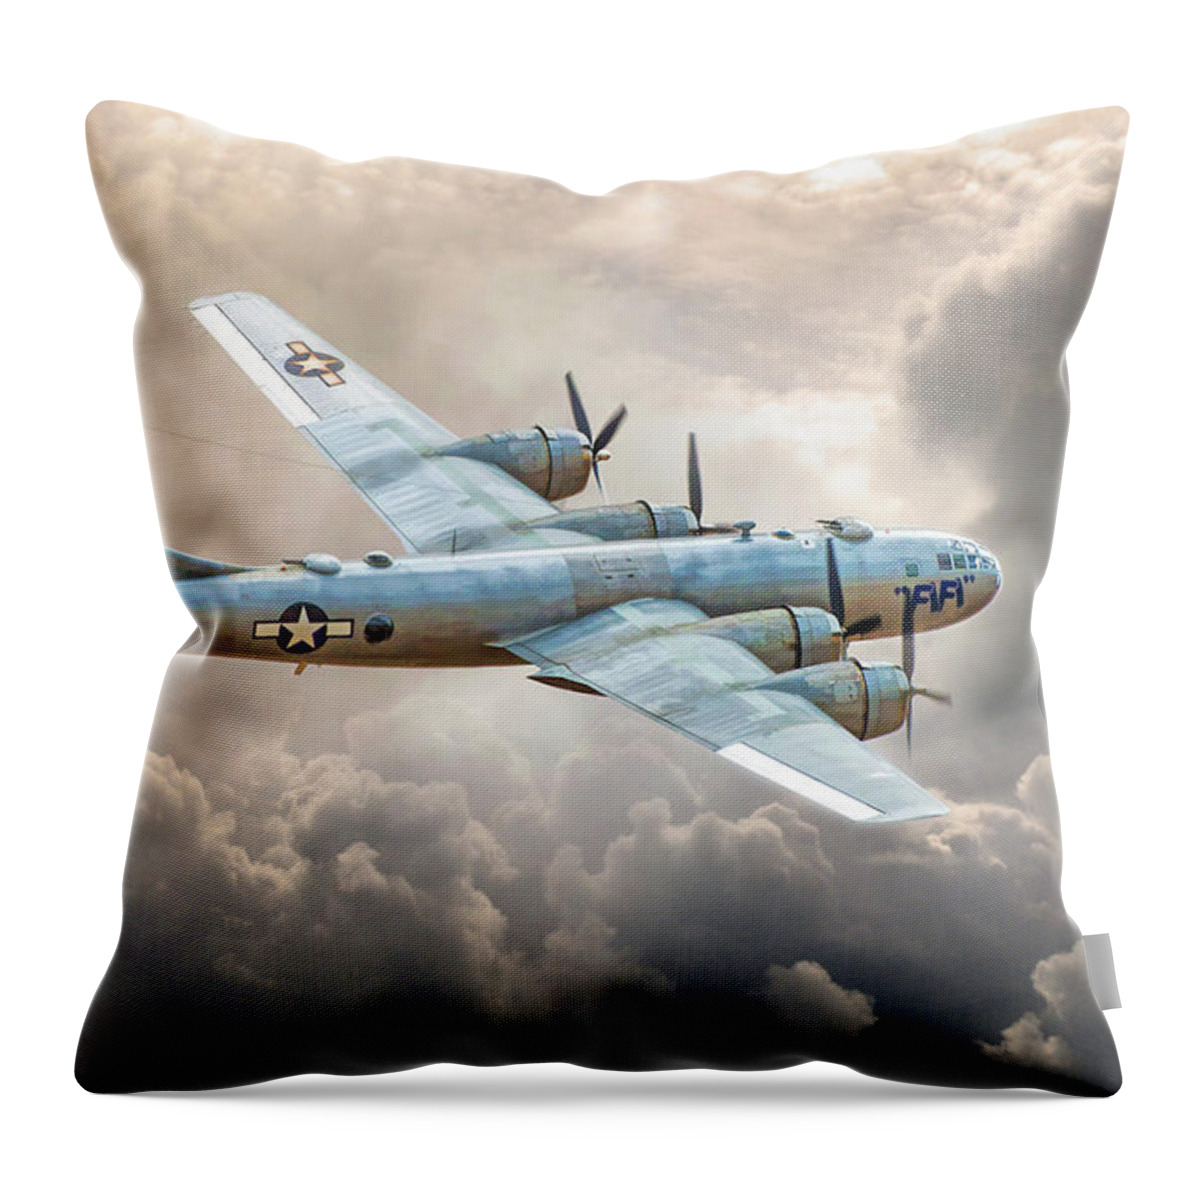 Airplane Throw Pillow featuring the painting B-29 Superfortress by Christopher Arndt